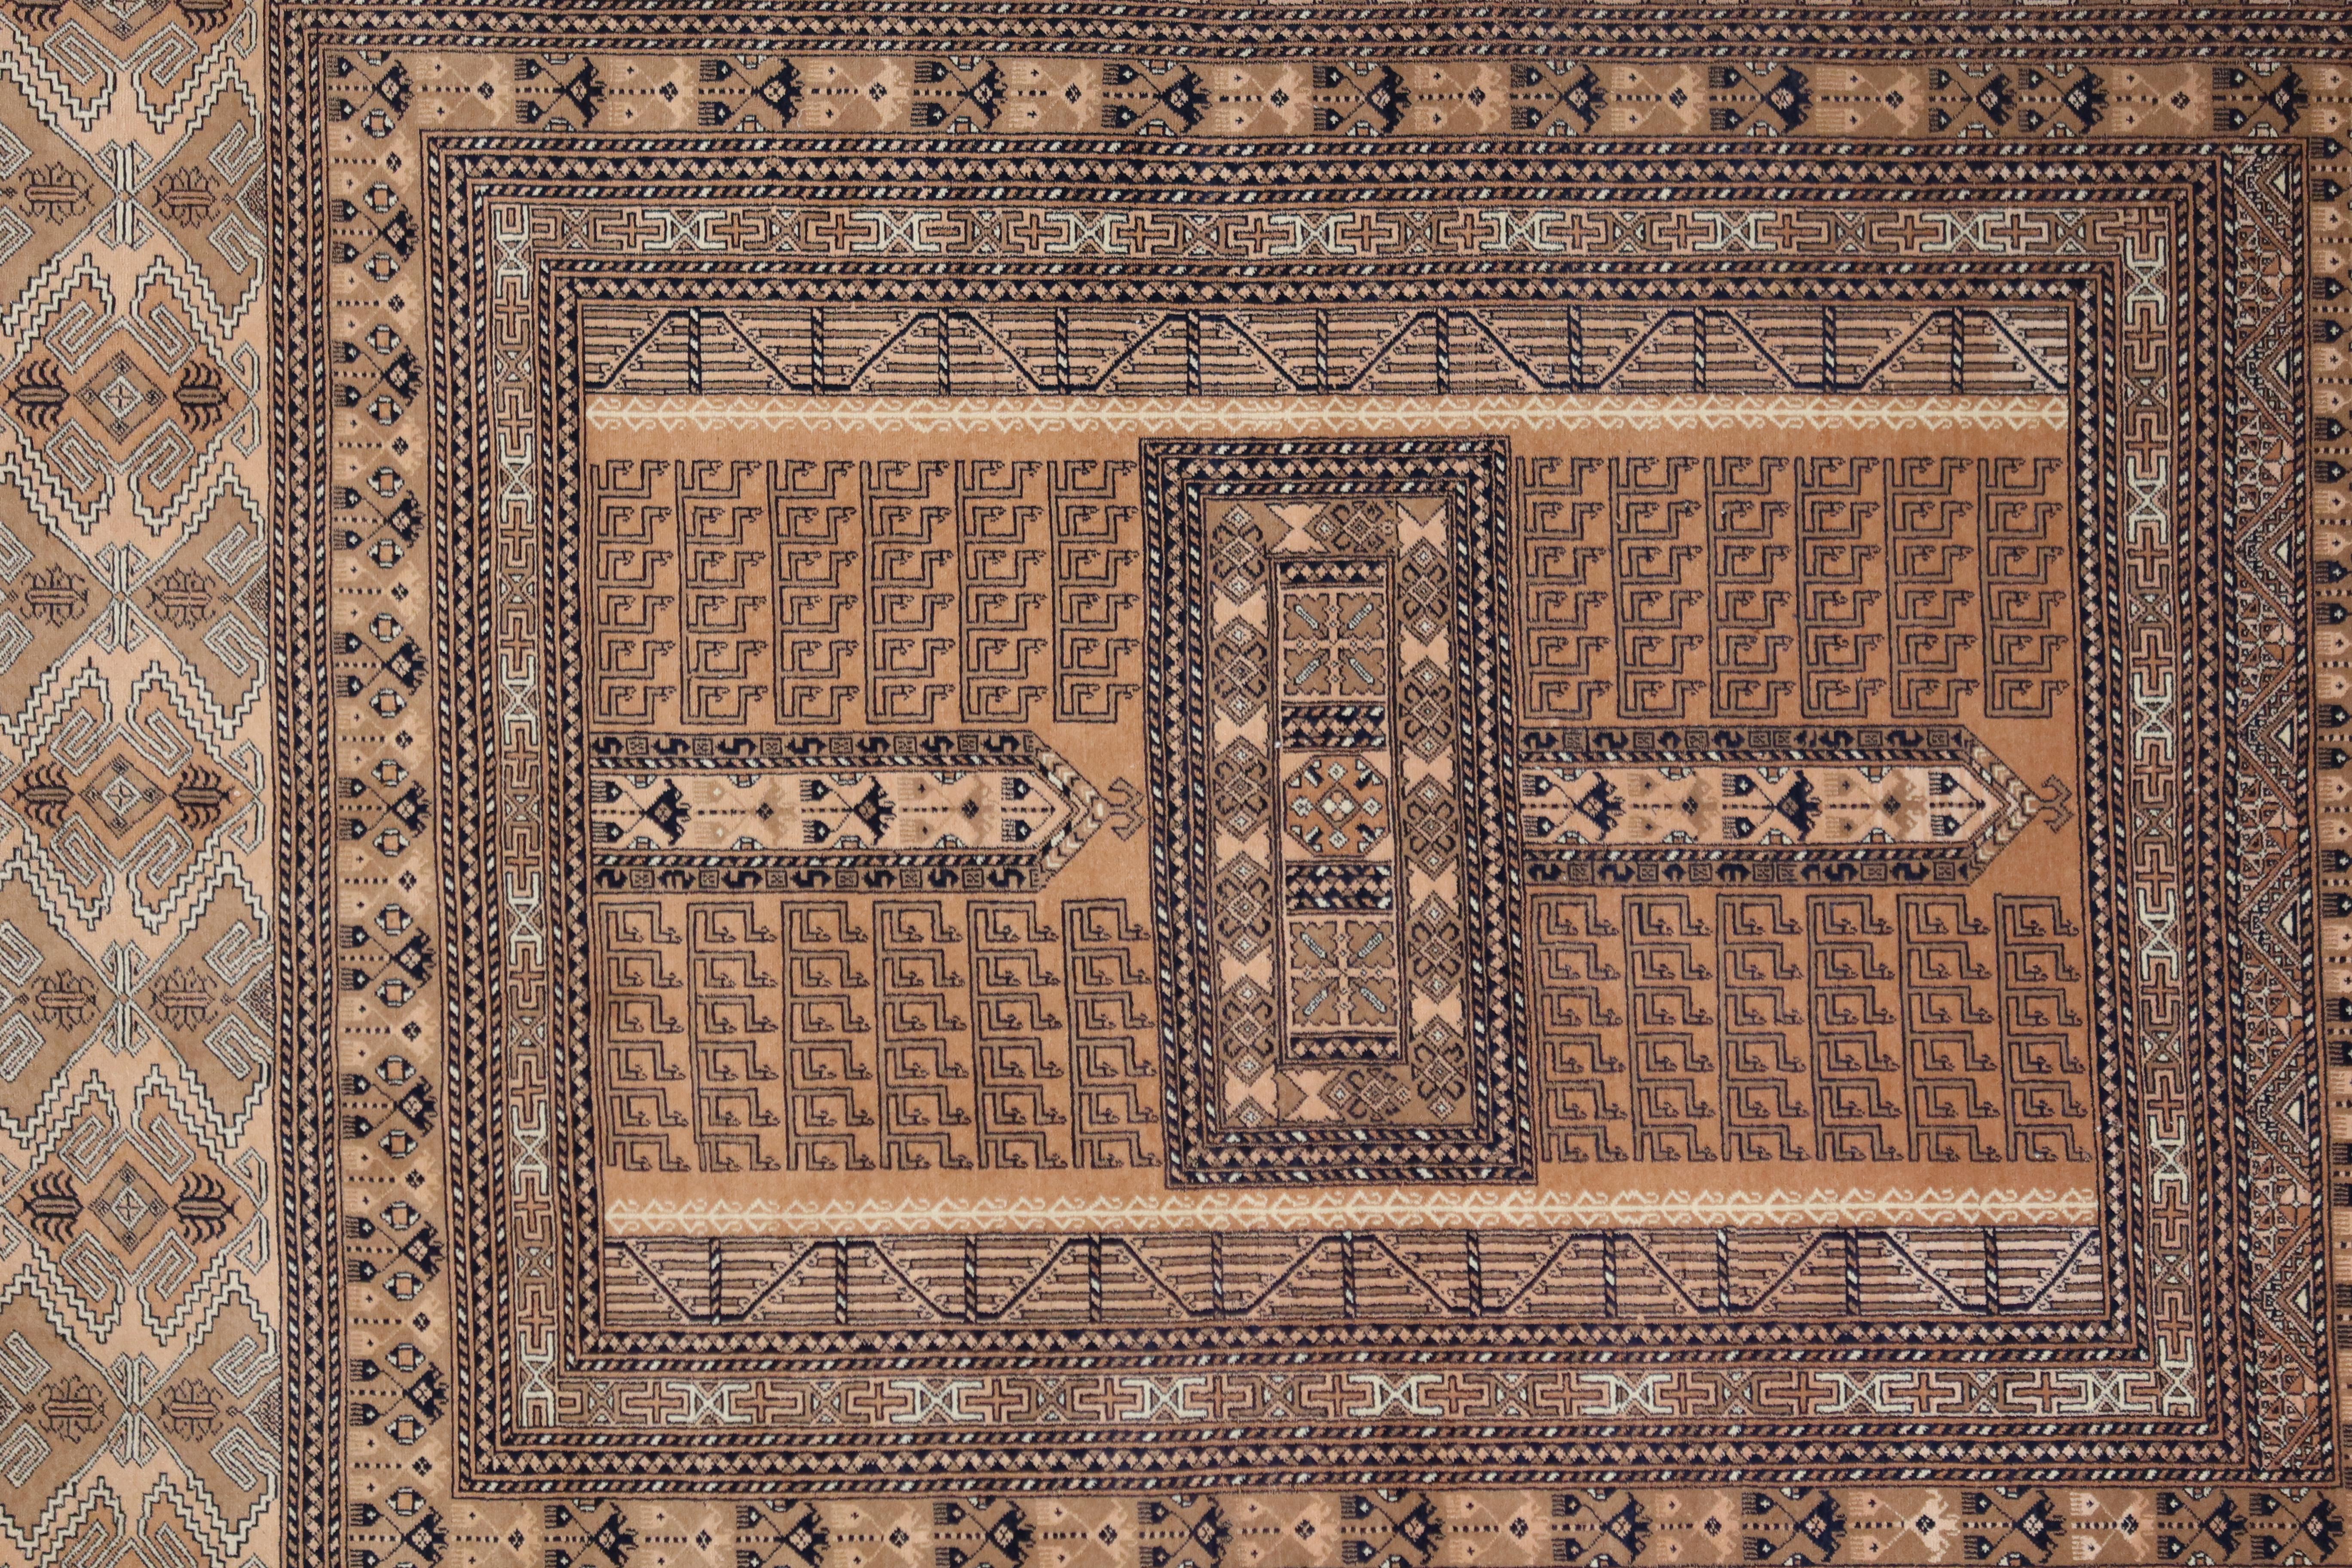 Hachlu rugs were made by Turkeman (Turkomen or Turkoman) tribes living mostly in Turkmenistan and Northern Afghanistan (Balkh province). The Hachlu designs are variants of Tekke Gul Bokhara rugs, based on Turkmen rug known as Engsi. Hachlu rugs are